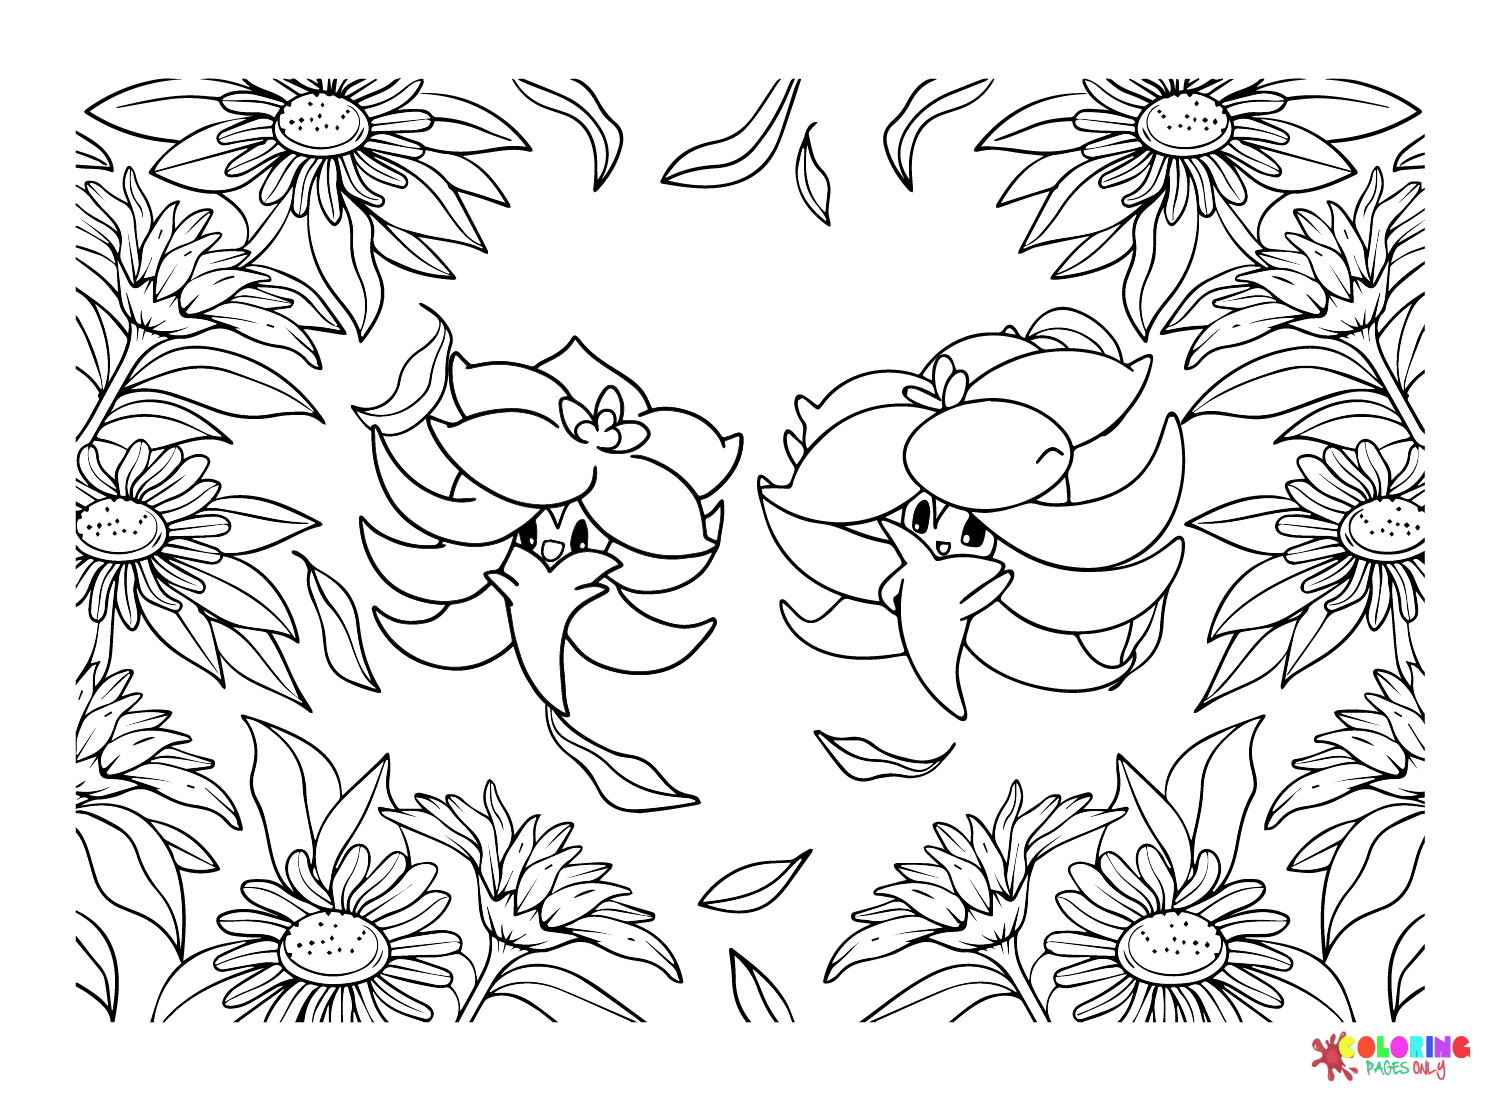 Flower and Gossifleur Coloring Page